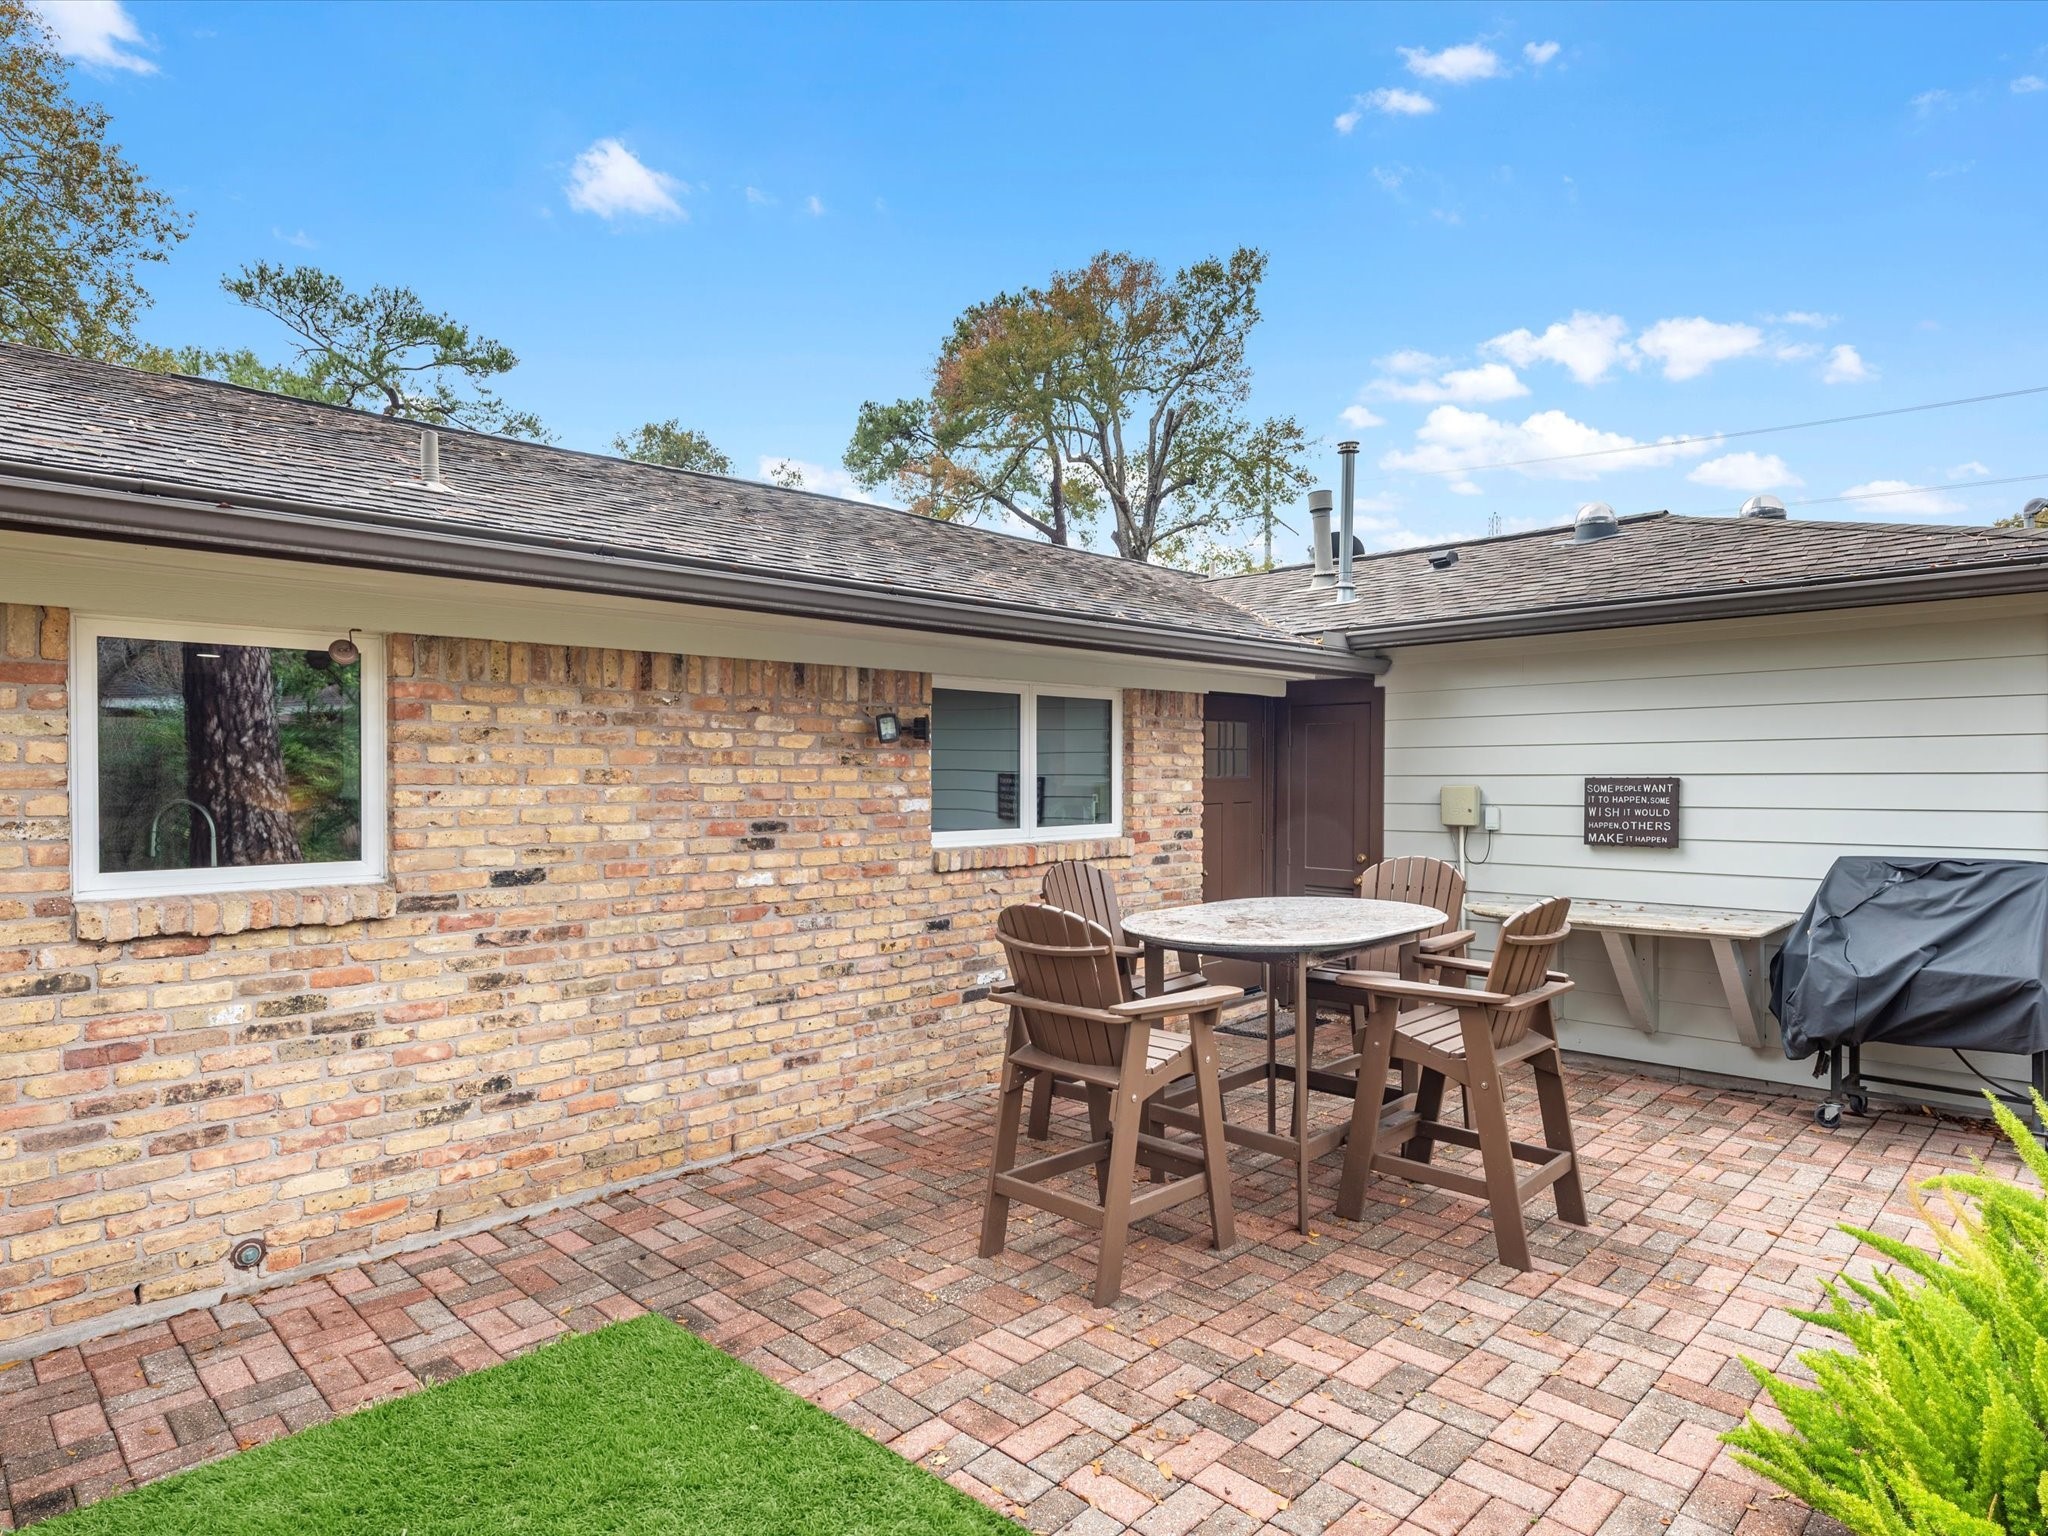 There is also a paved patio in the backyard! A built-in buffet provides counterspace for the grilling enthusiast.